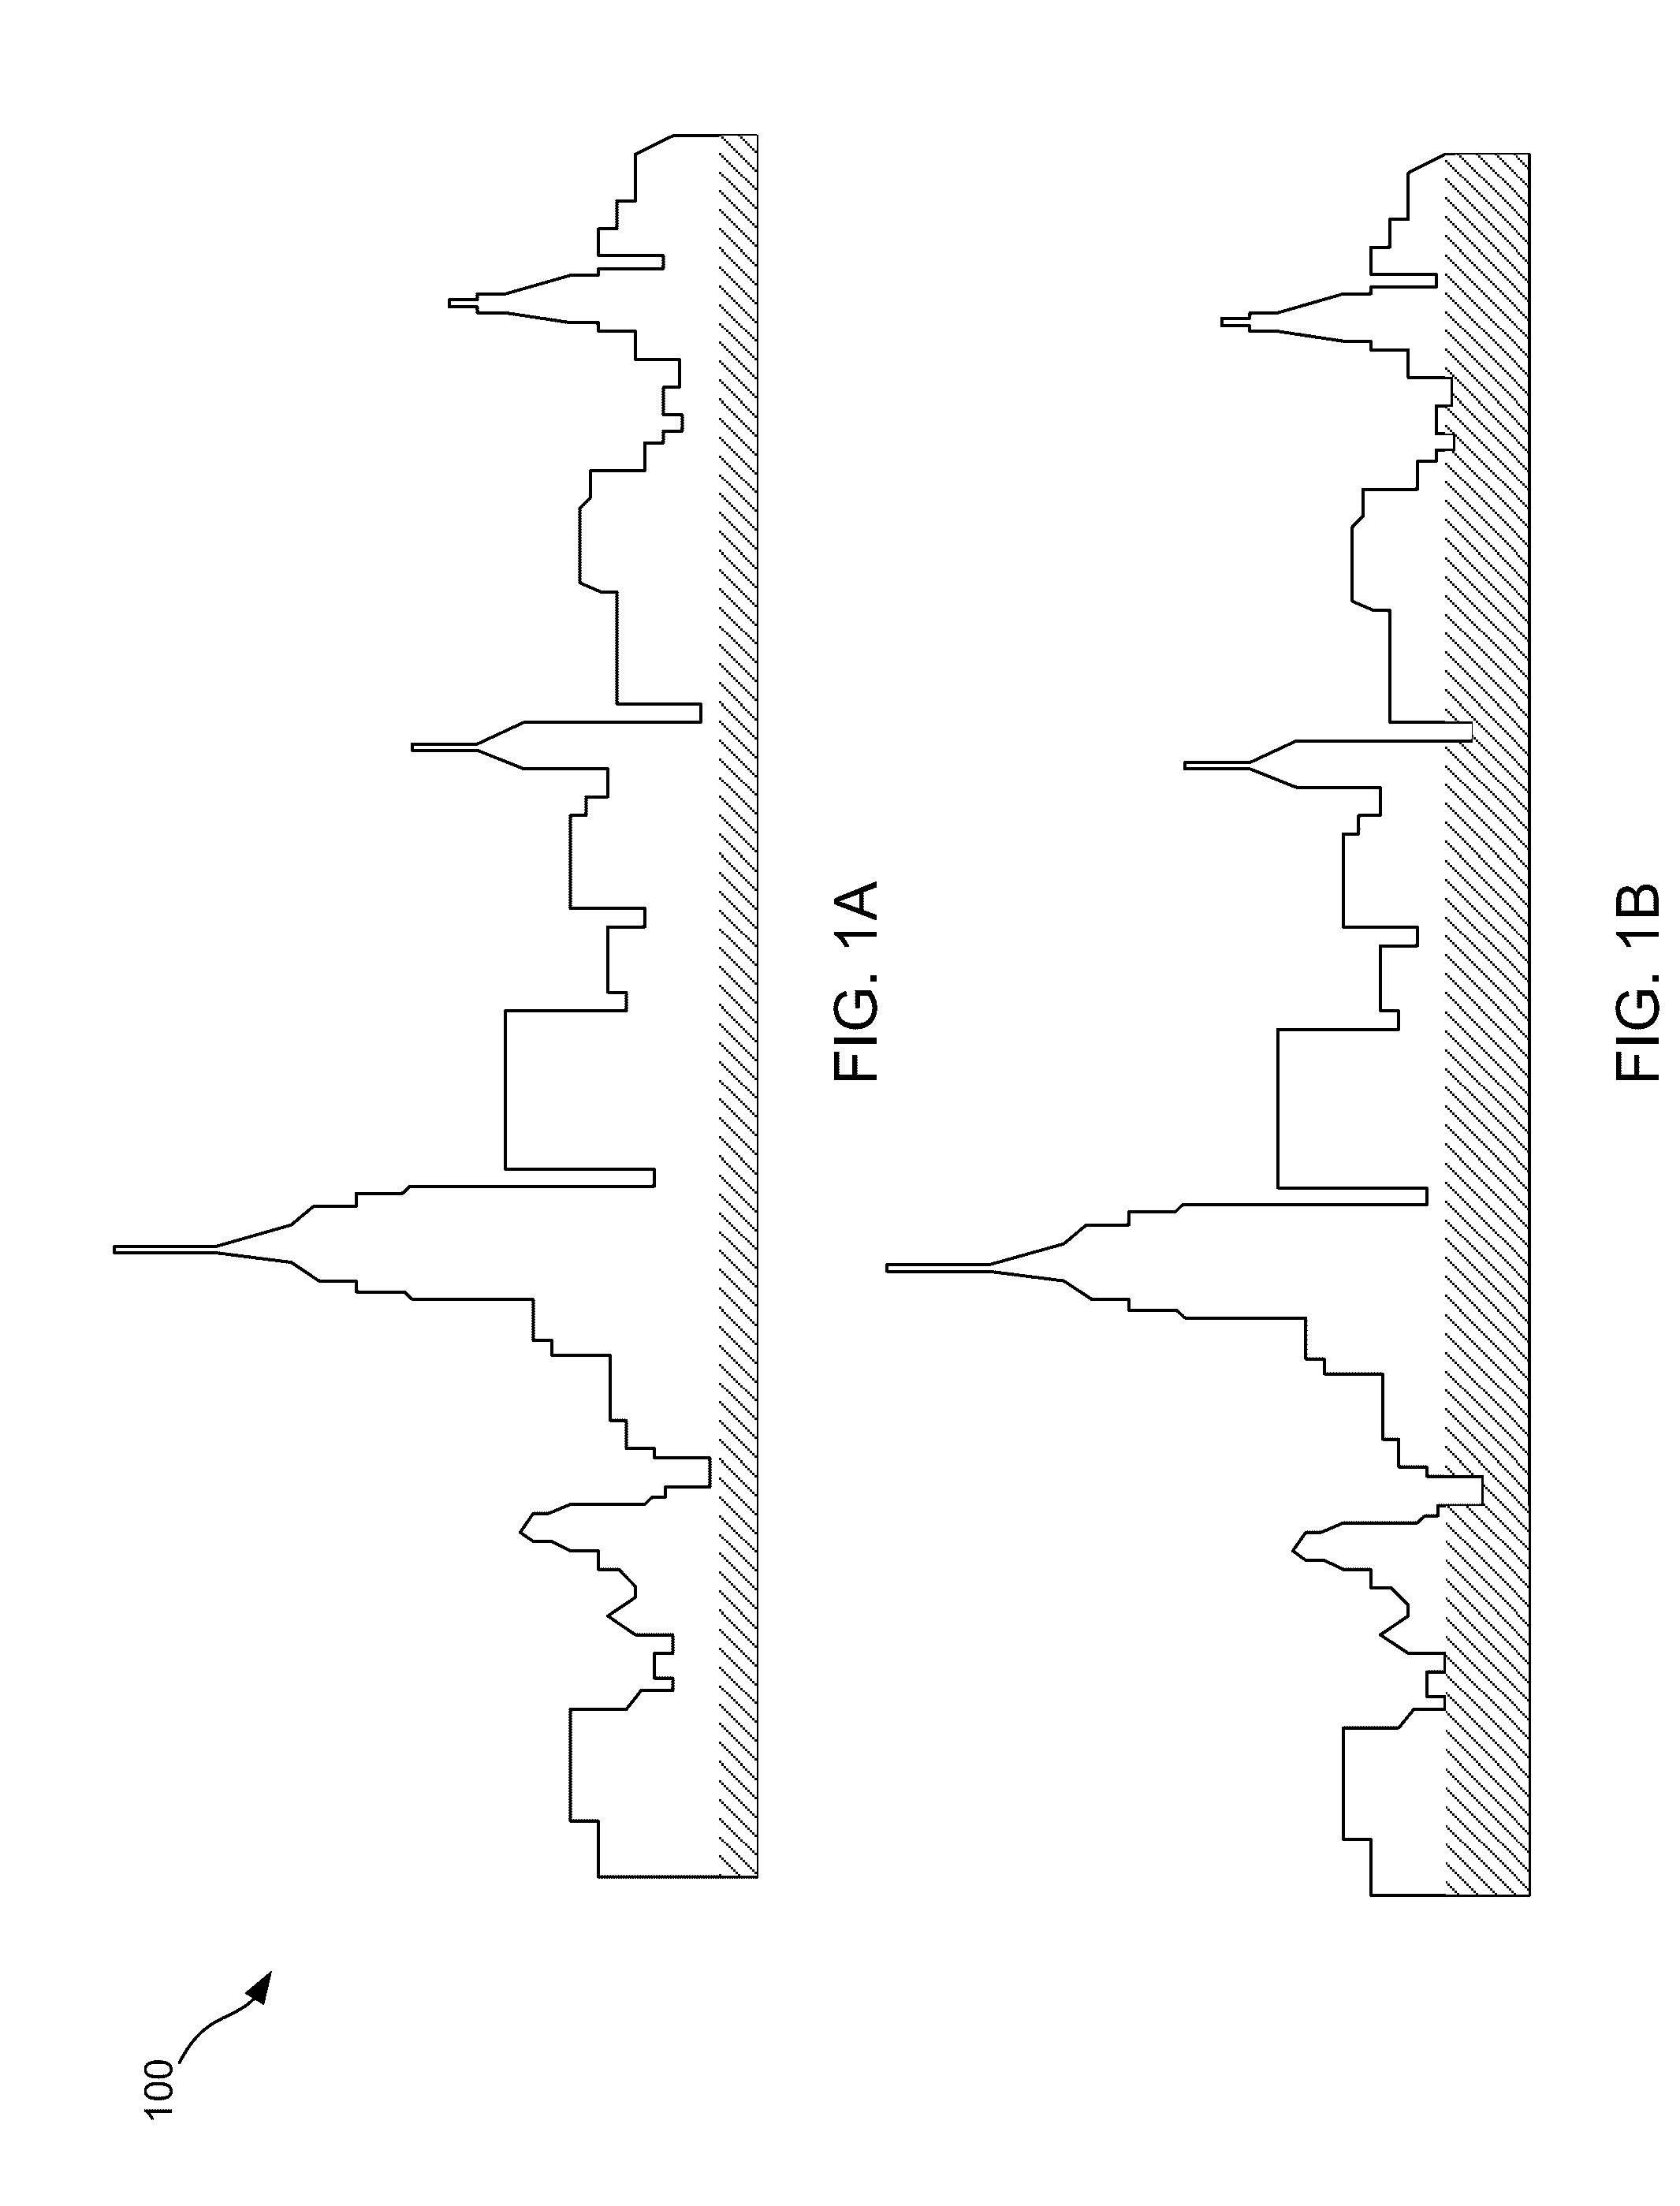 Dynamic filling of shapes for graphical display of data